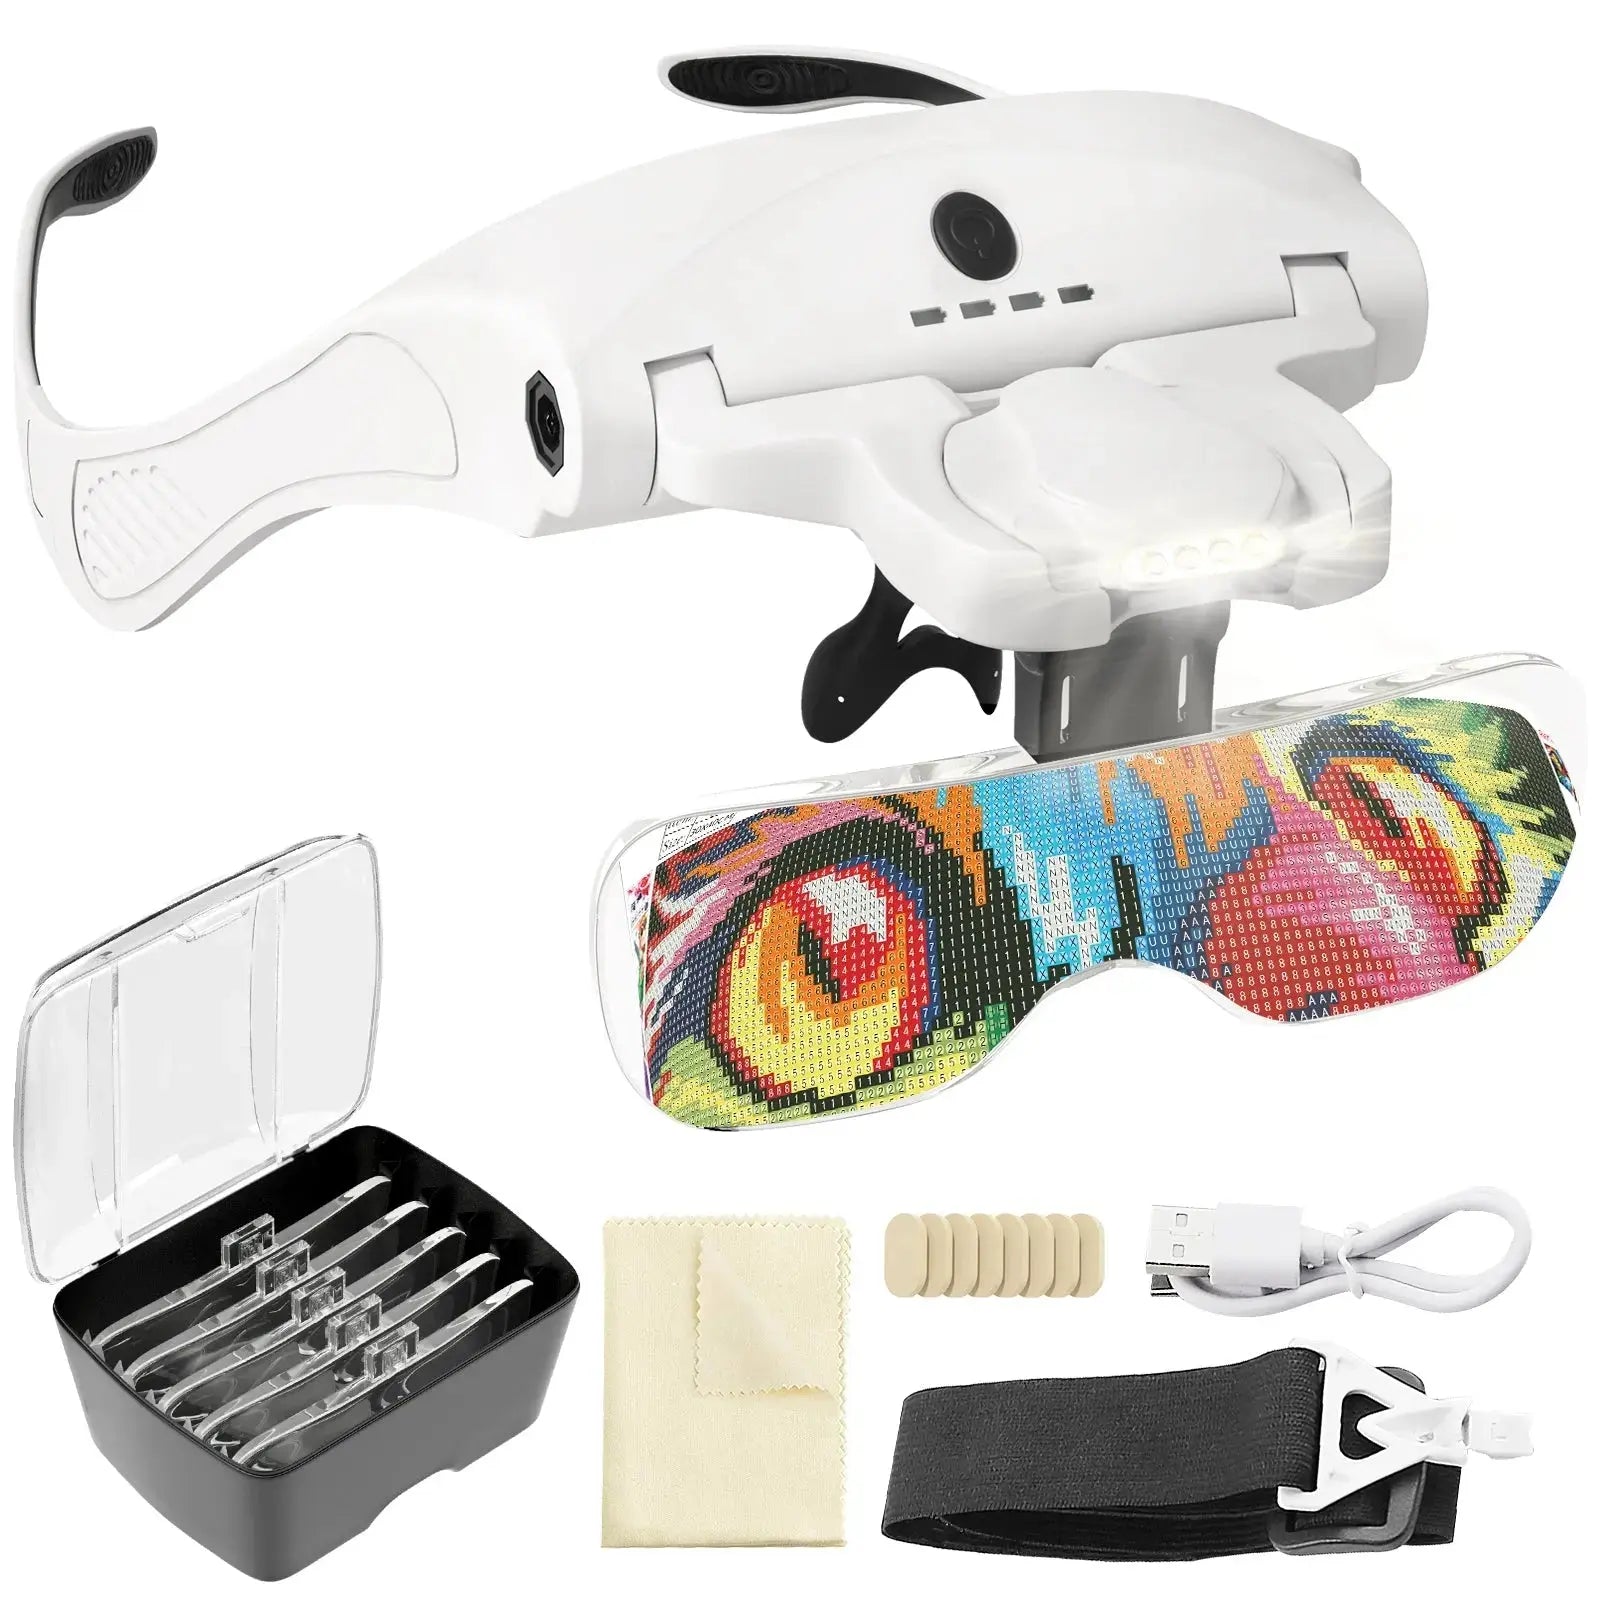 Bundle Sales Hands Free Magnifying Glasses For Hobbyists